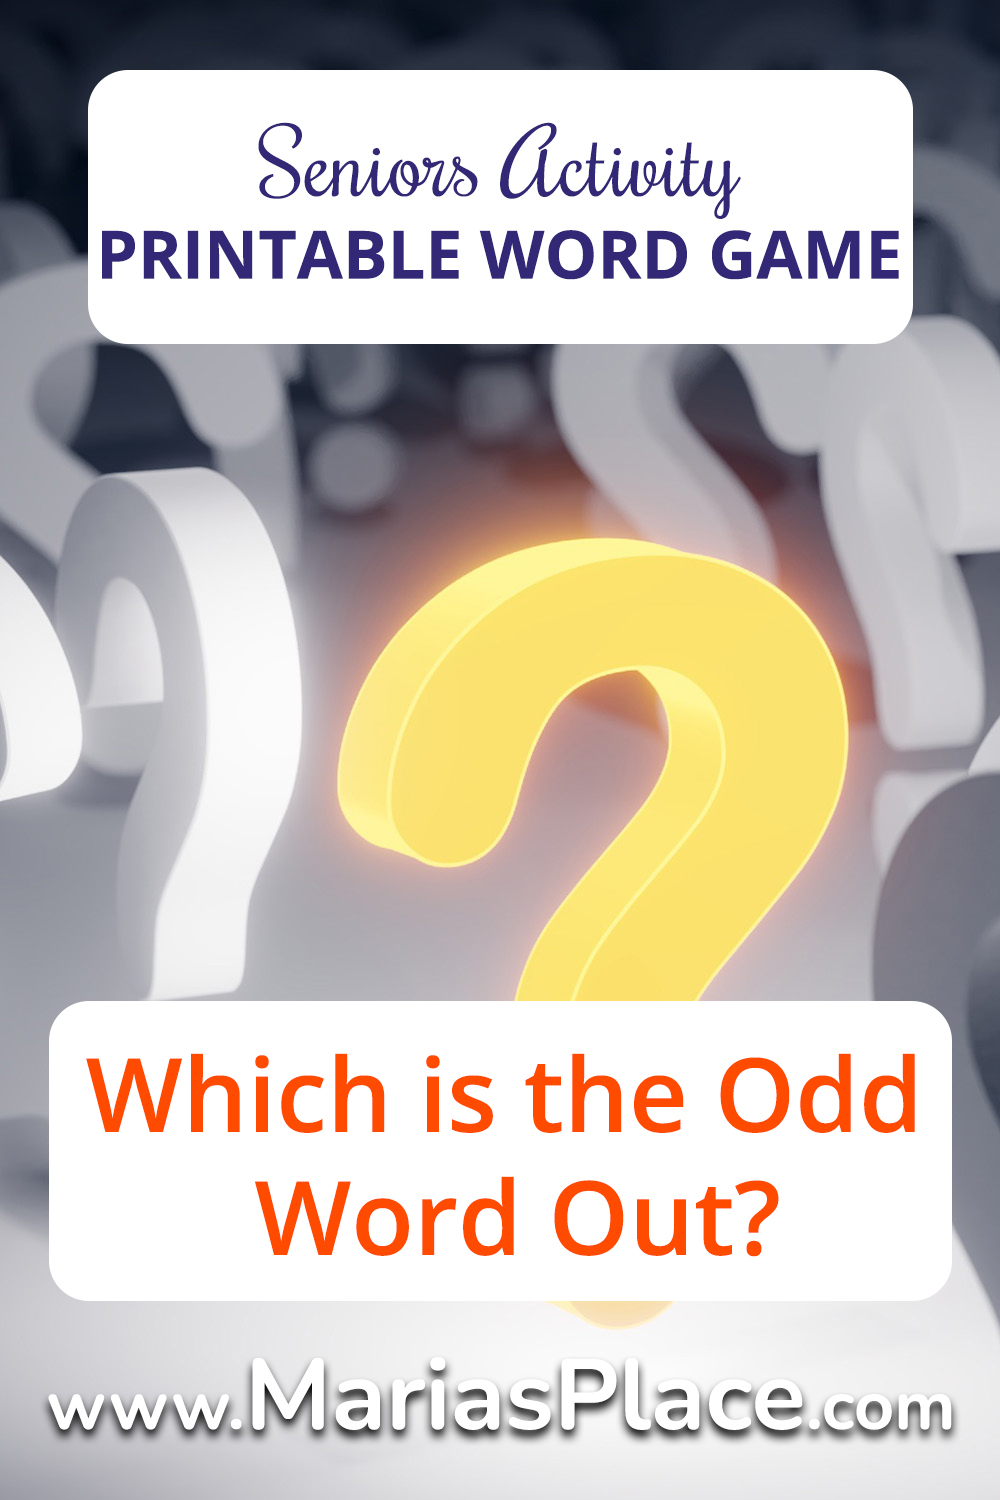 Odd Word Out Activity